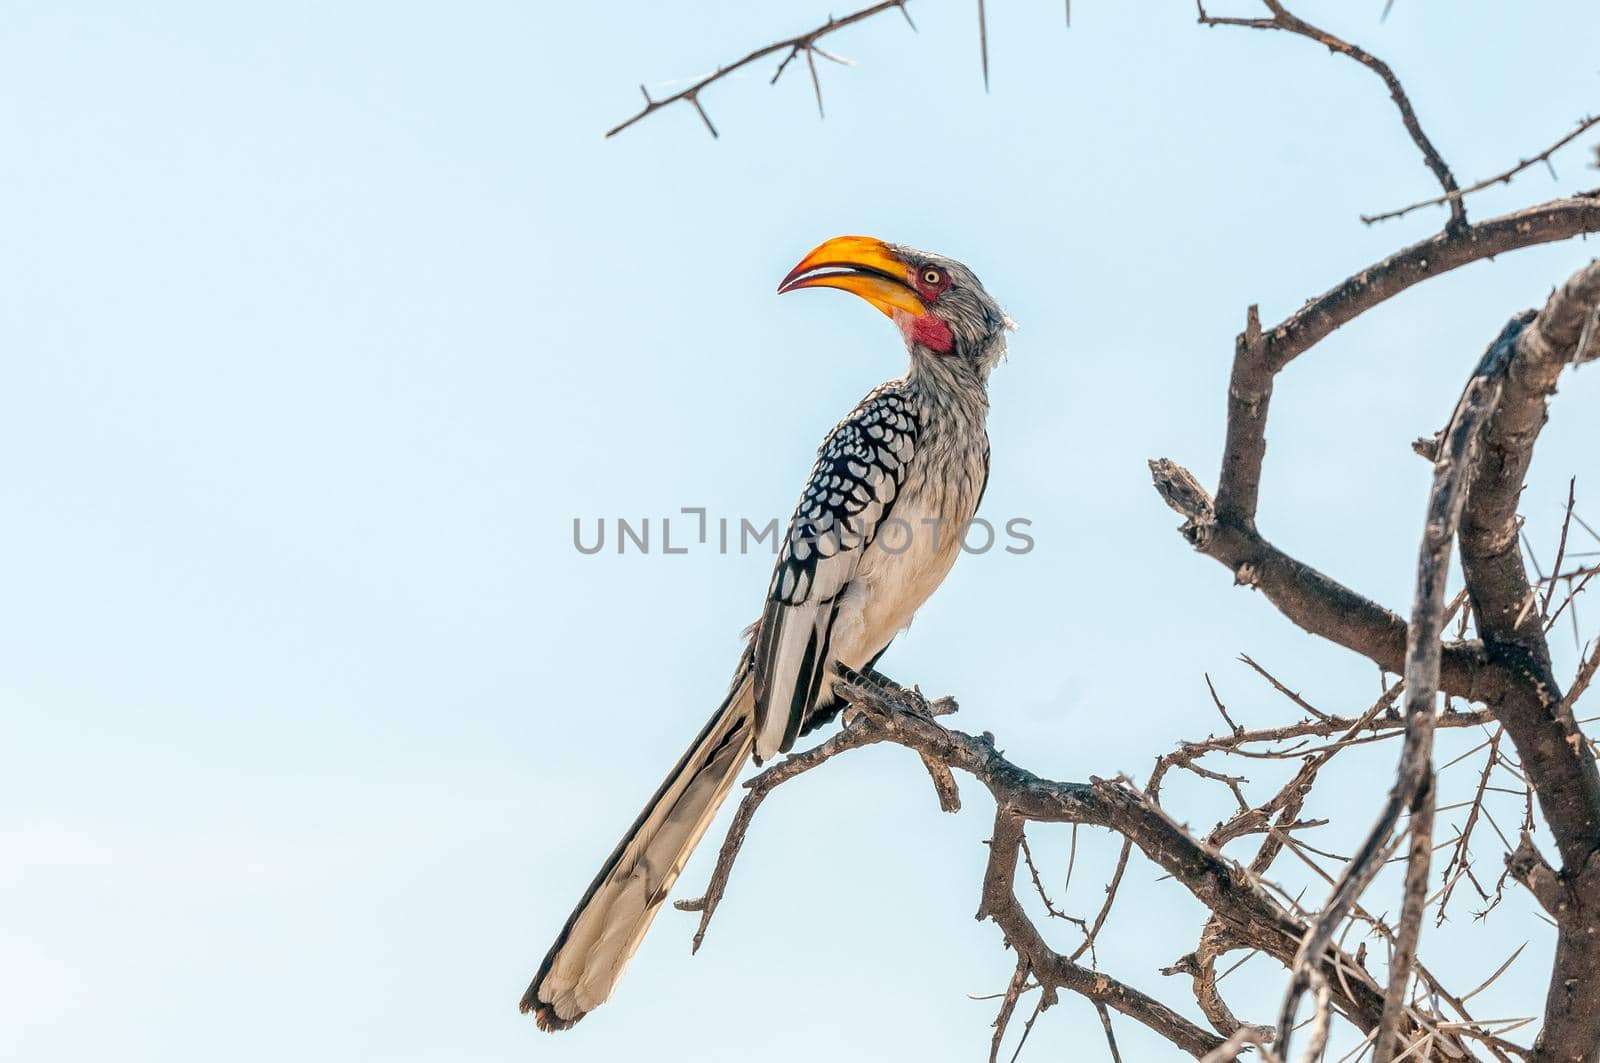 A Southern Yellow-billed Hornbill, Tockus leucomelas, looking back on a tree branch in northern Namibia